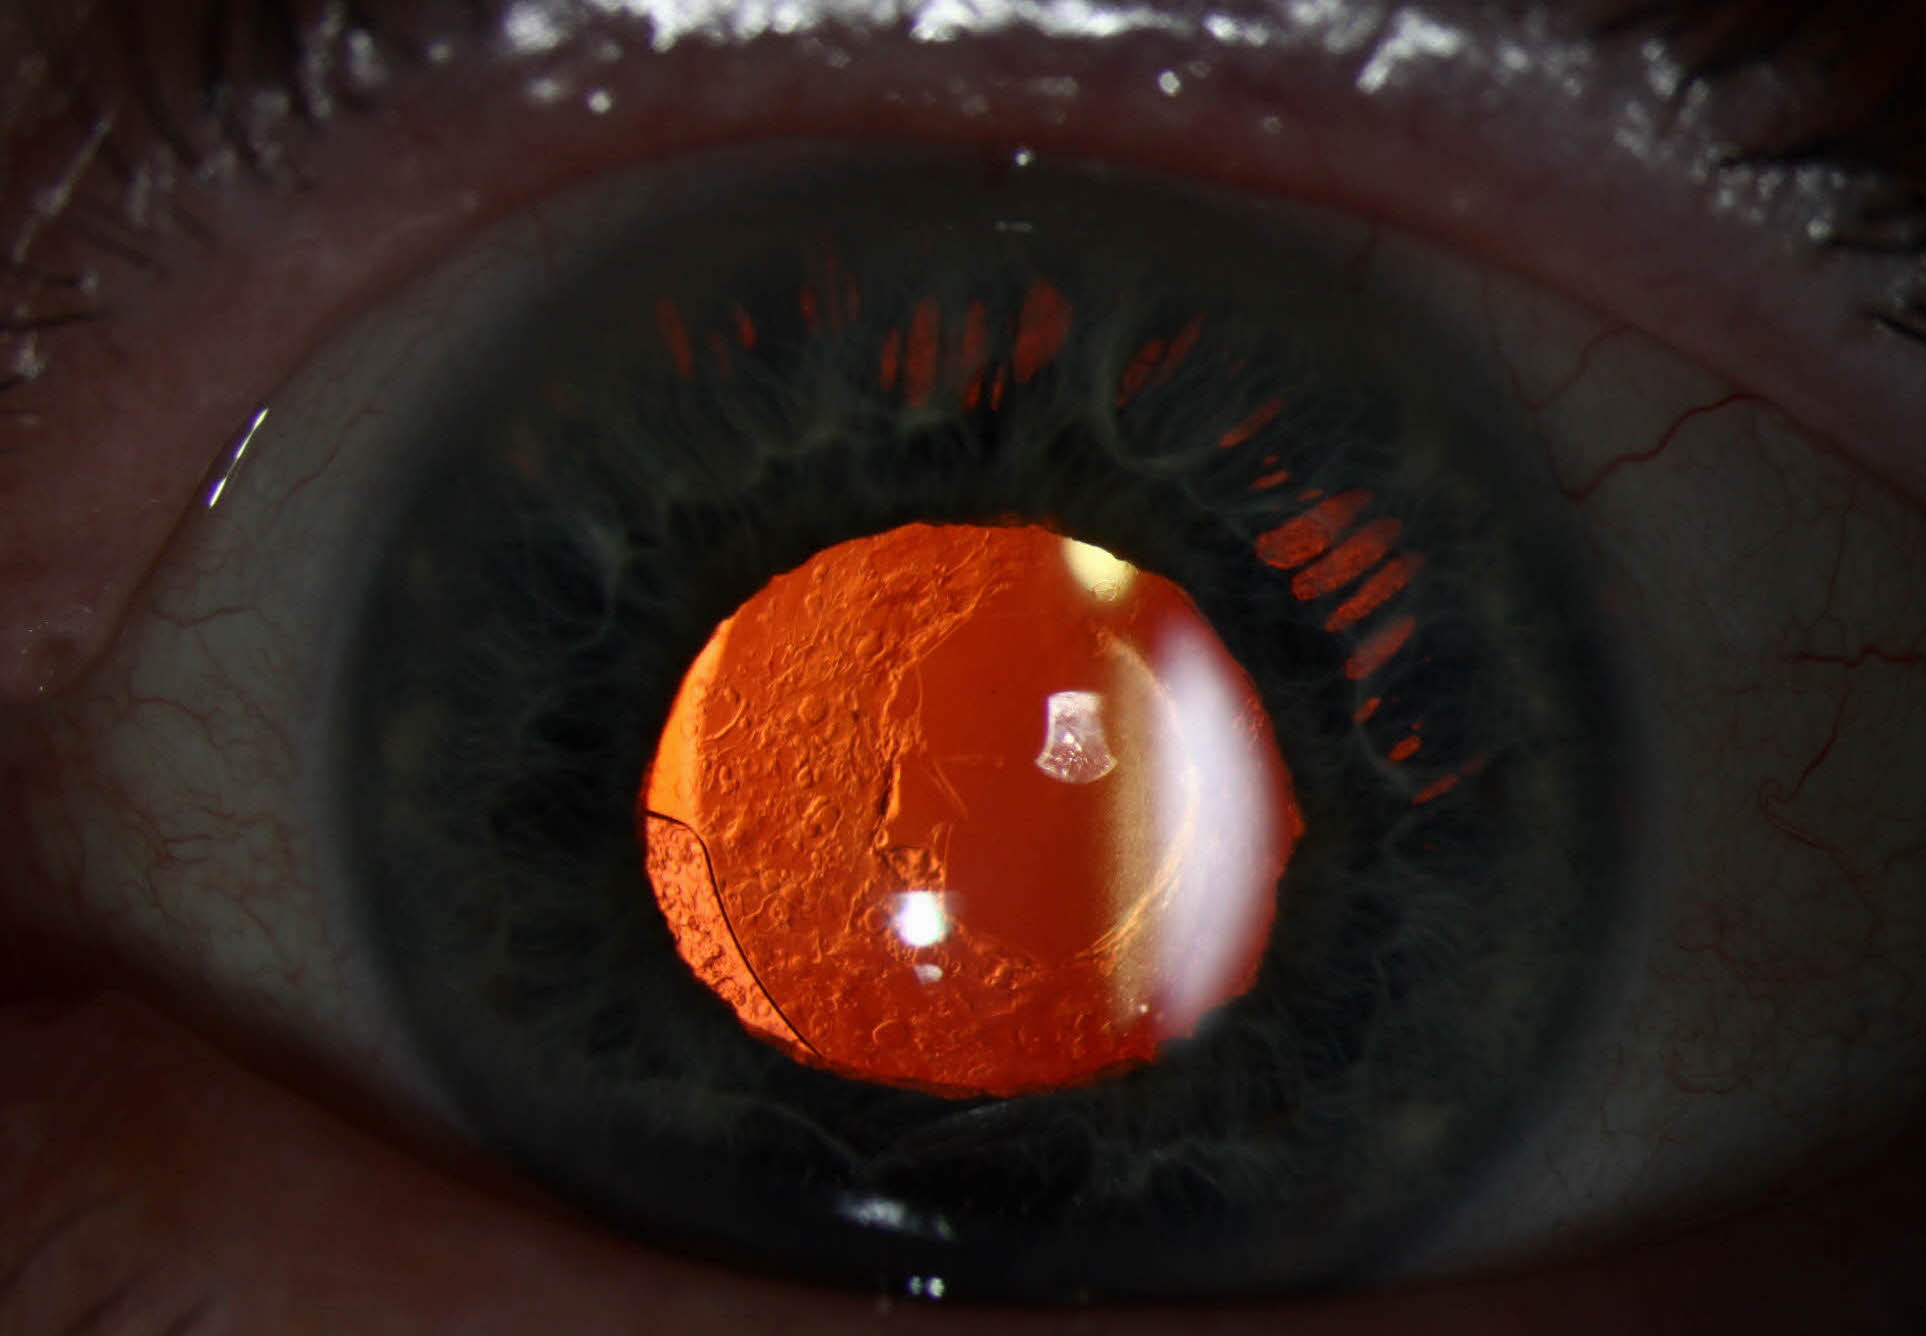 This study noted an average improvement in vision from 20/41 at baseline to 20/23 at three weeks post-op in patients who underwent optometrist-performed YAG capsulotomy.